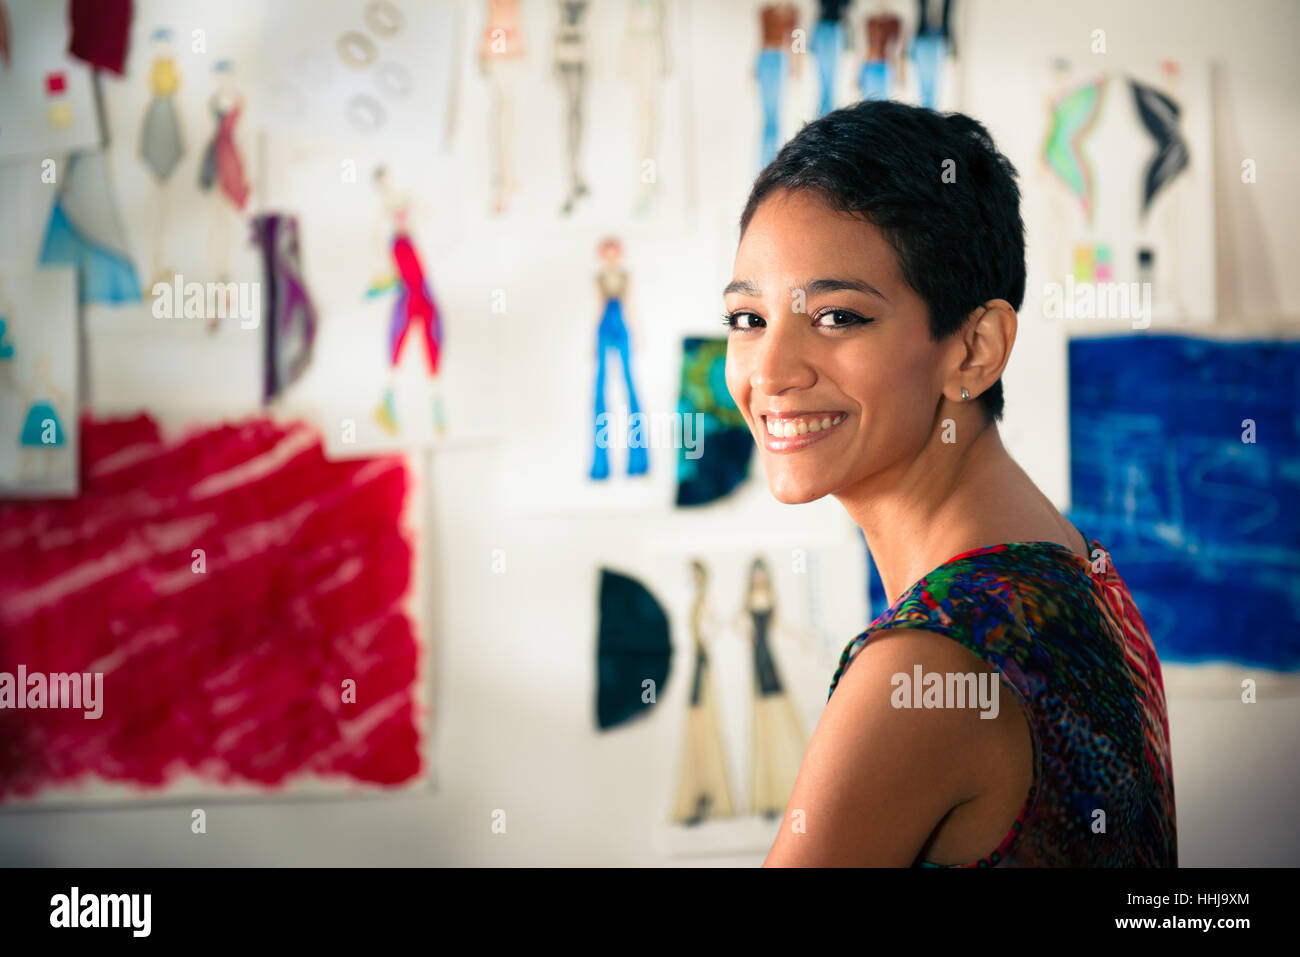 woman, fashion, work, factory, drawings, delighted, unambitious, enthusiastic, Stock Photo